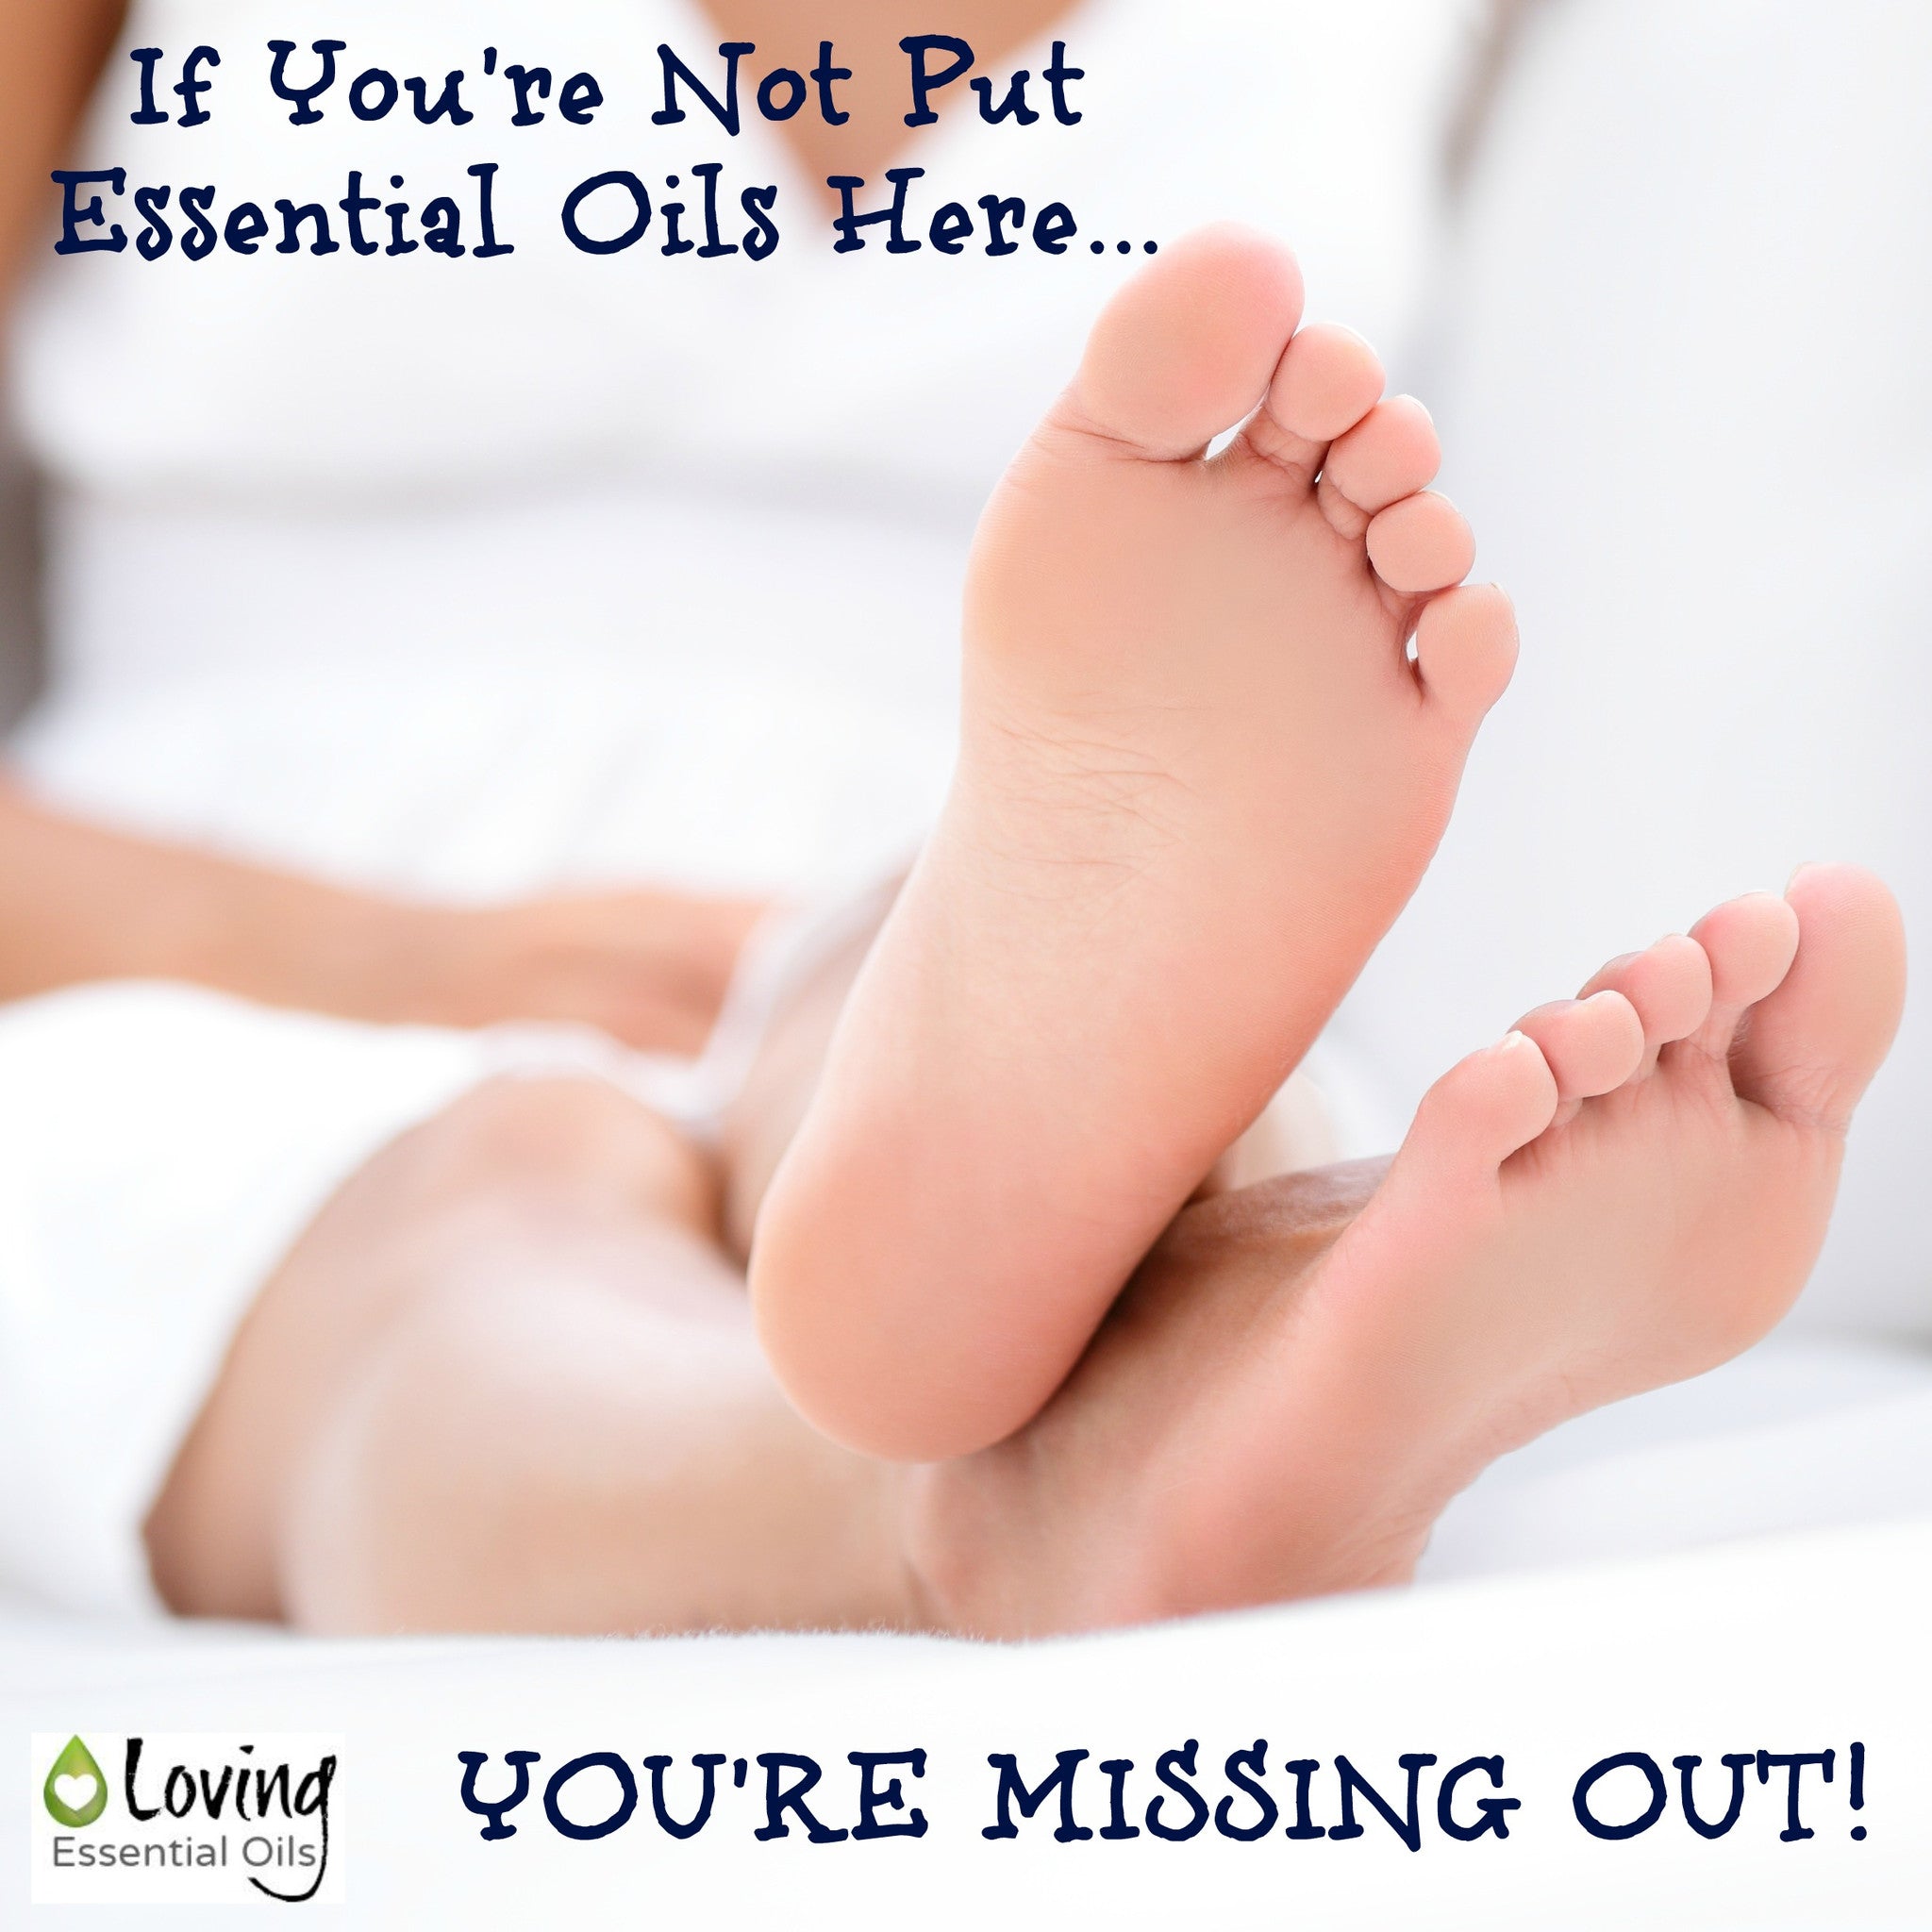 Why Would I Put Essential Oils on My Feet?